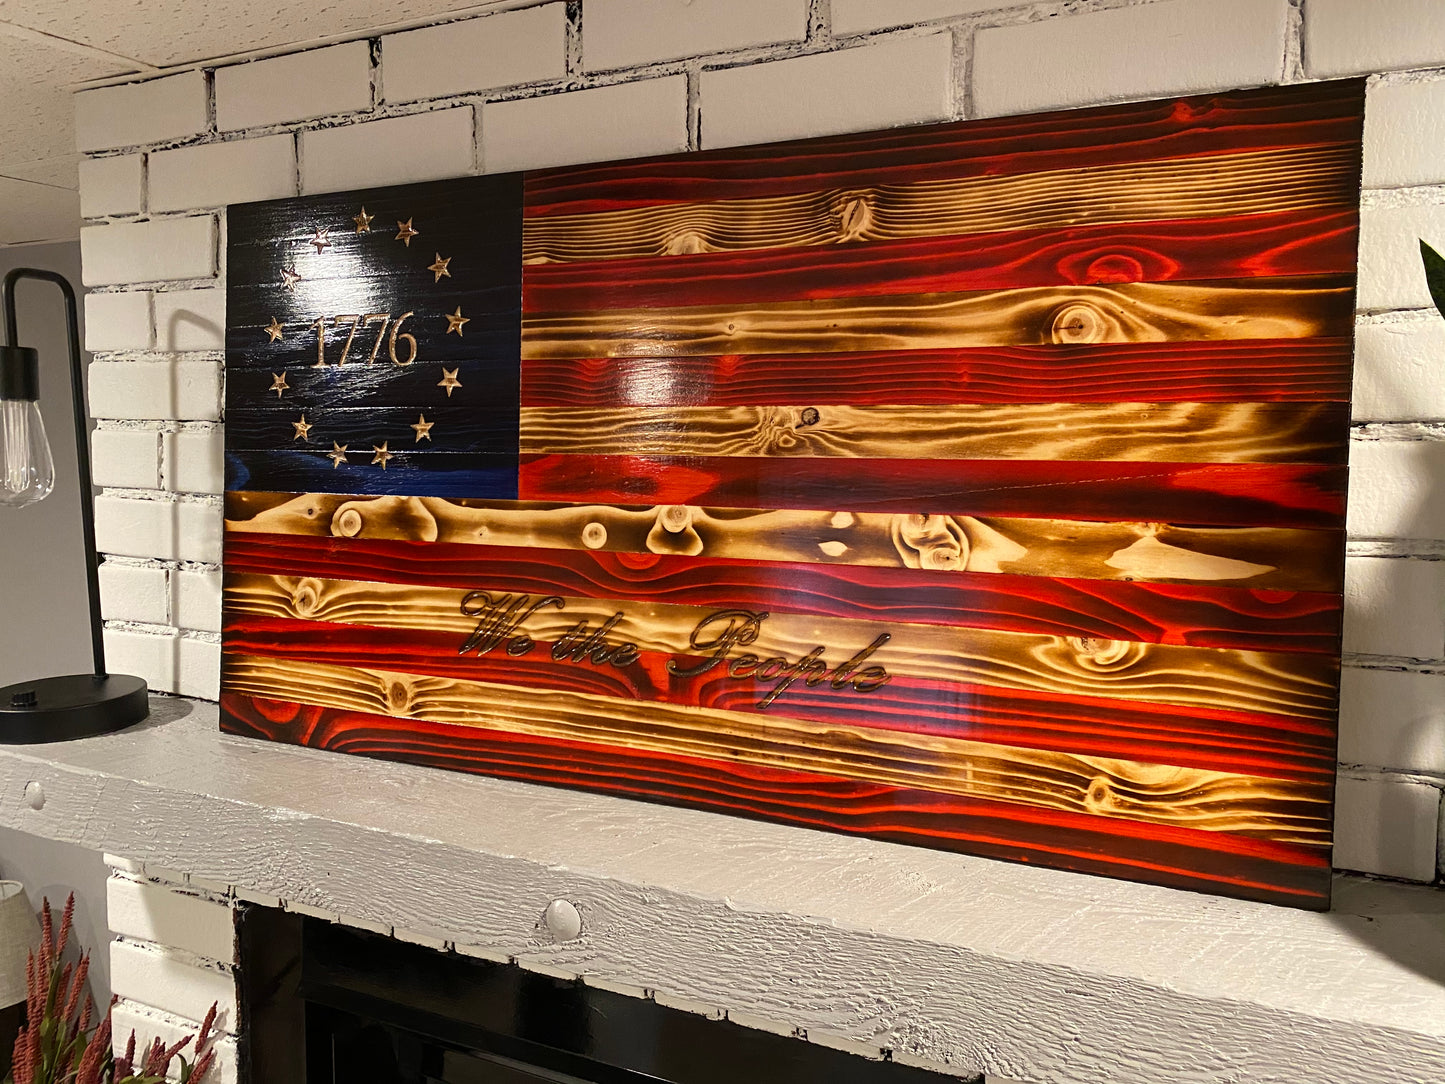 "We the People" Betsy Ross 1776 The Natural American Wooden Charred